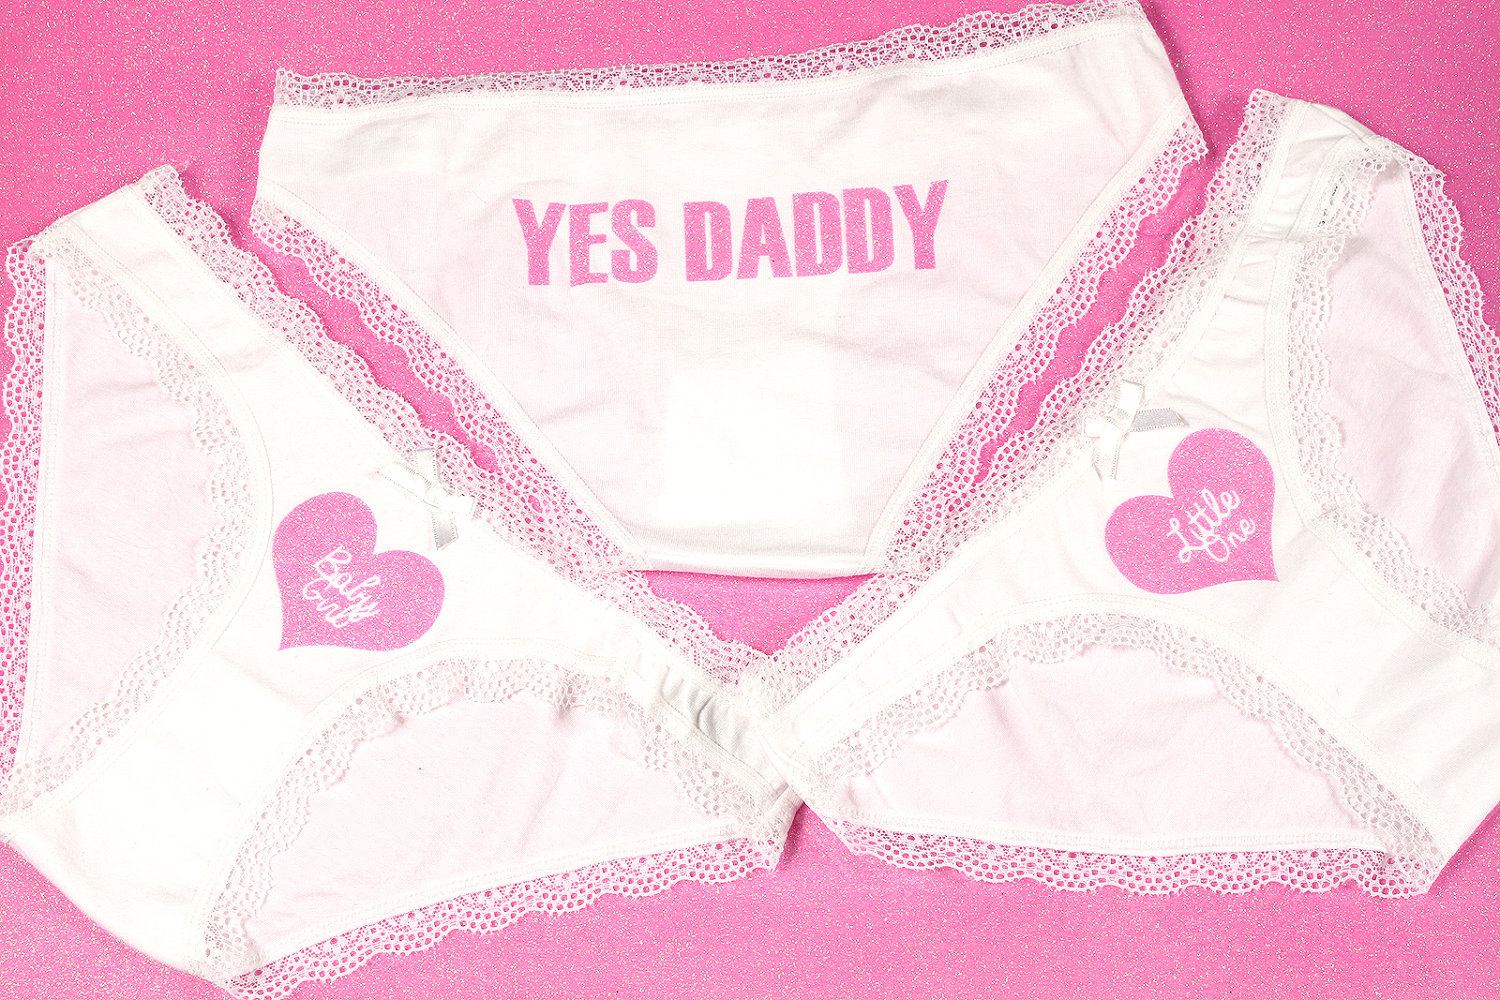 Ddlg Panties Cute Personalised Yes Daddy Ddlg Lingerie With